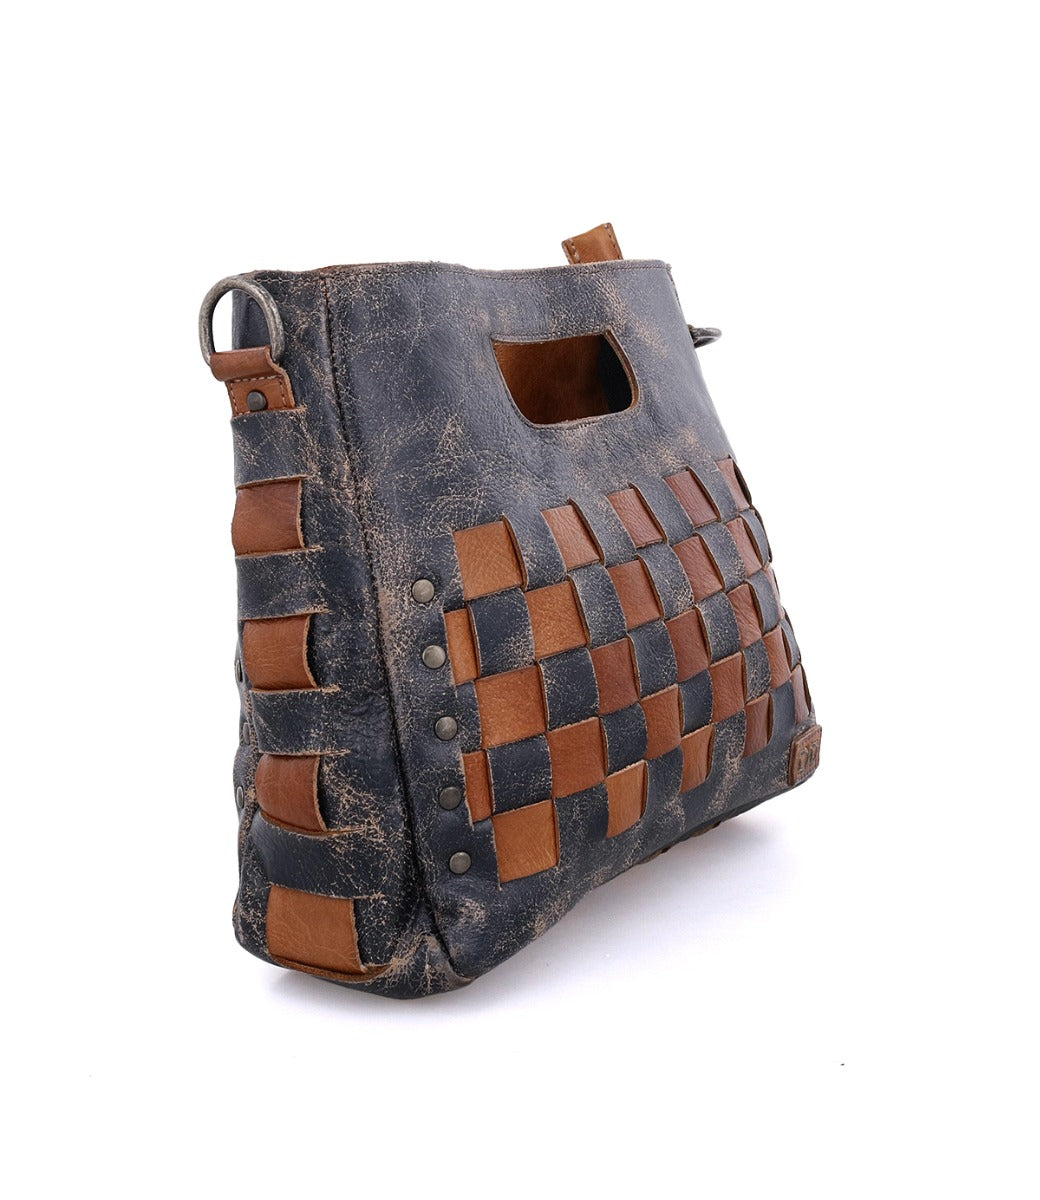 A black and brown Keiki leather bag with a woven pattern by Bed Stu.